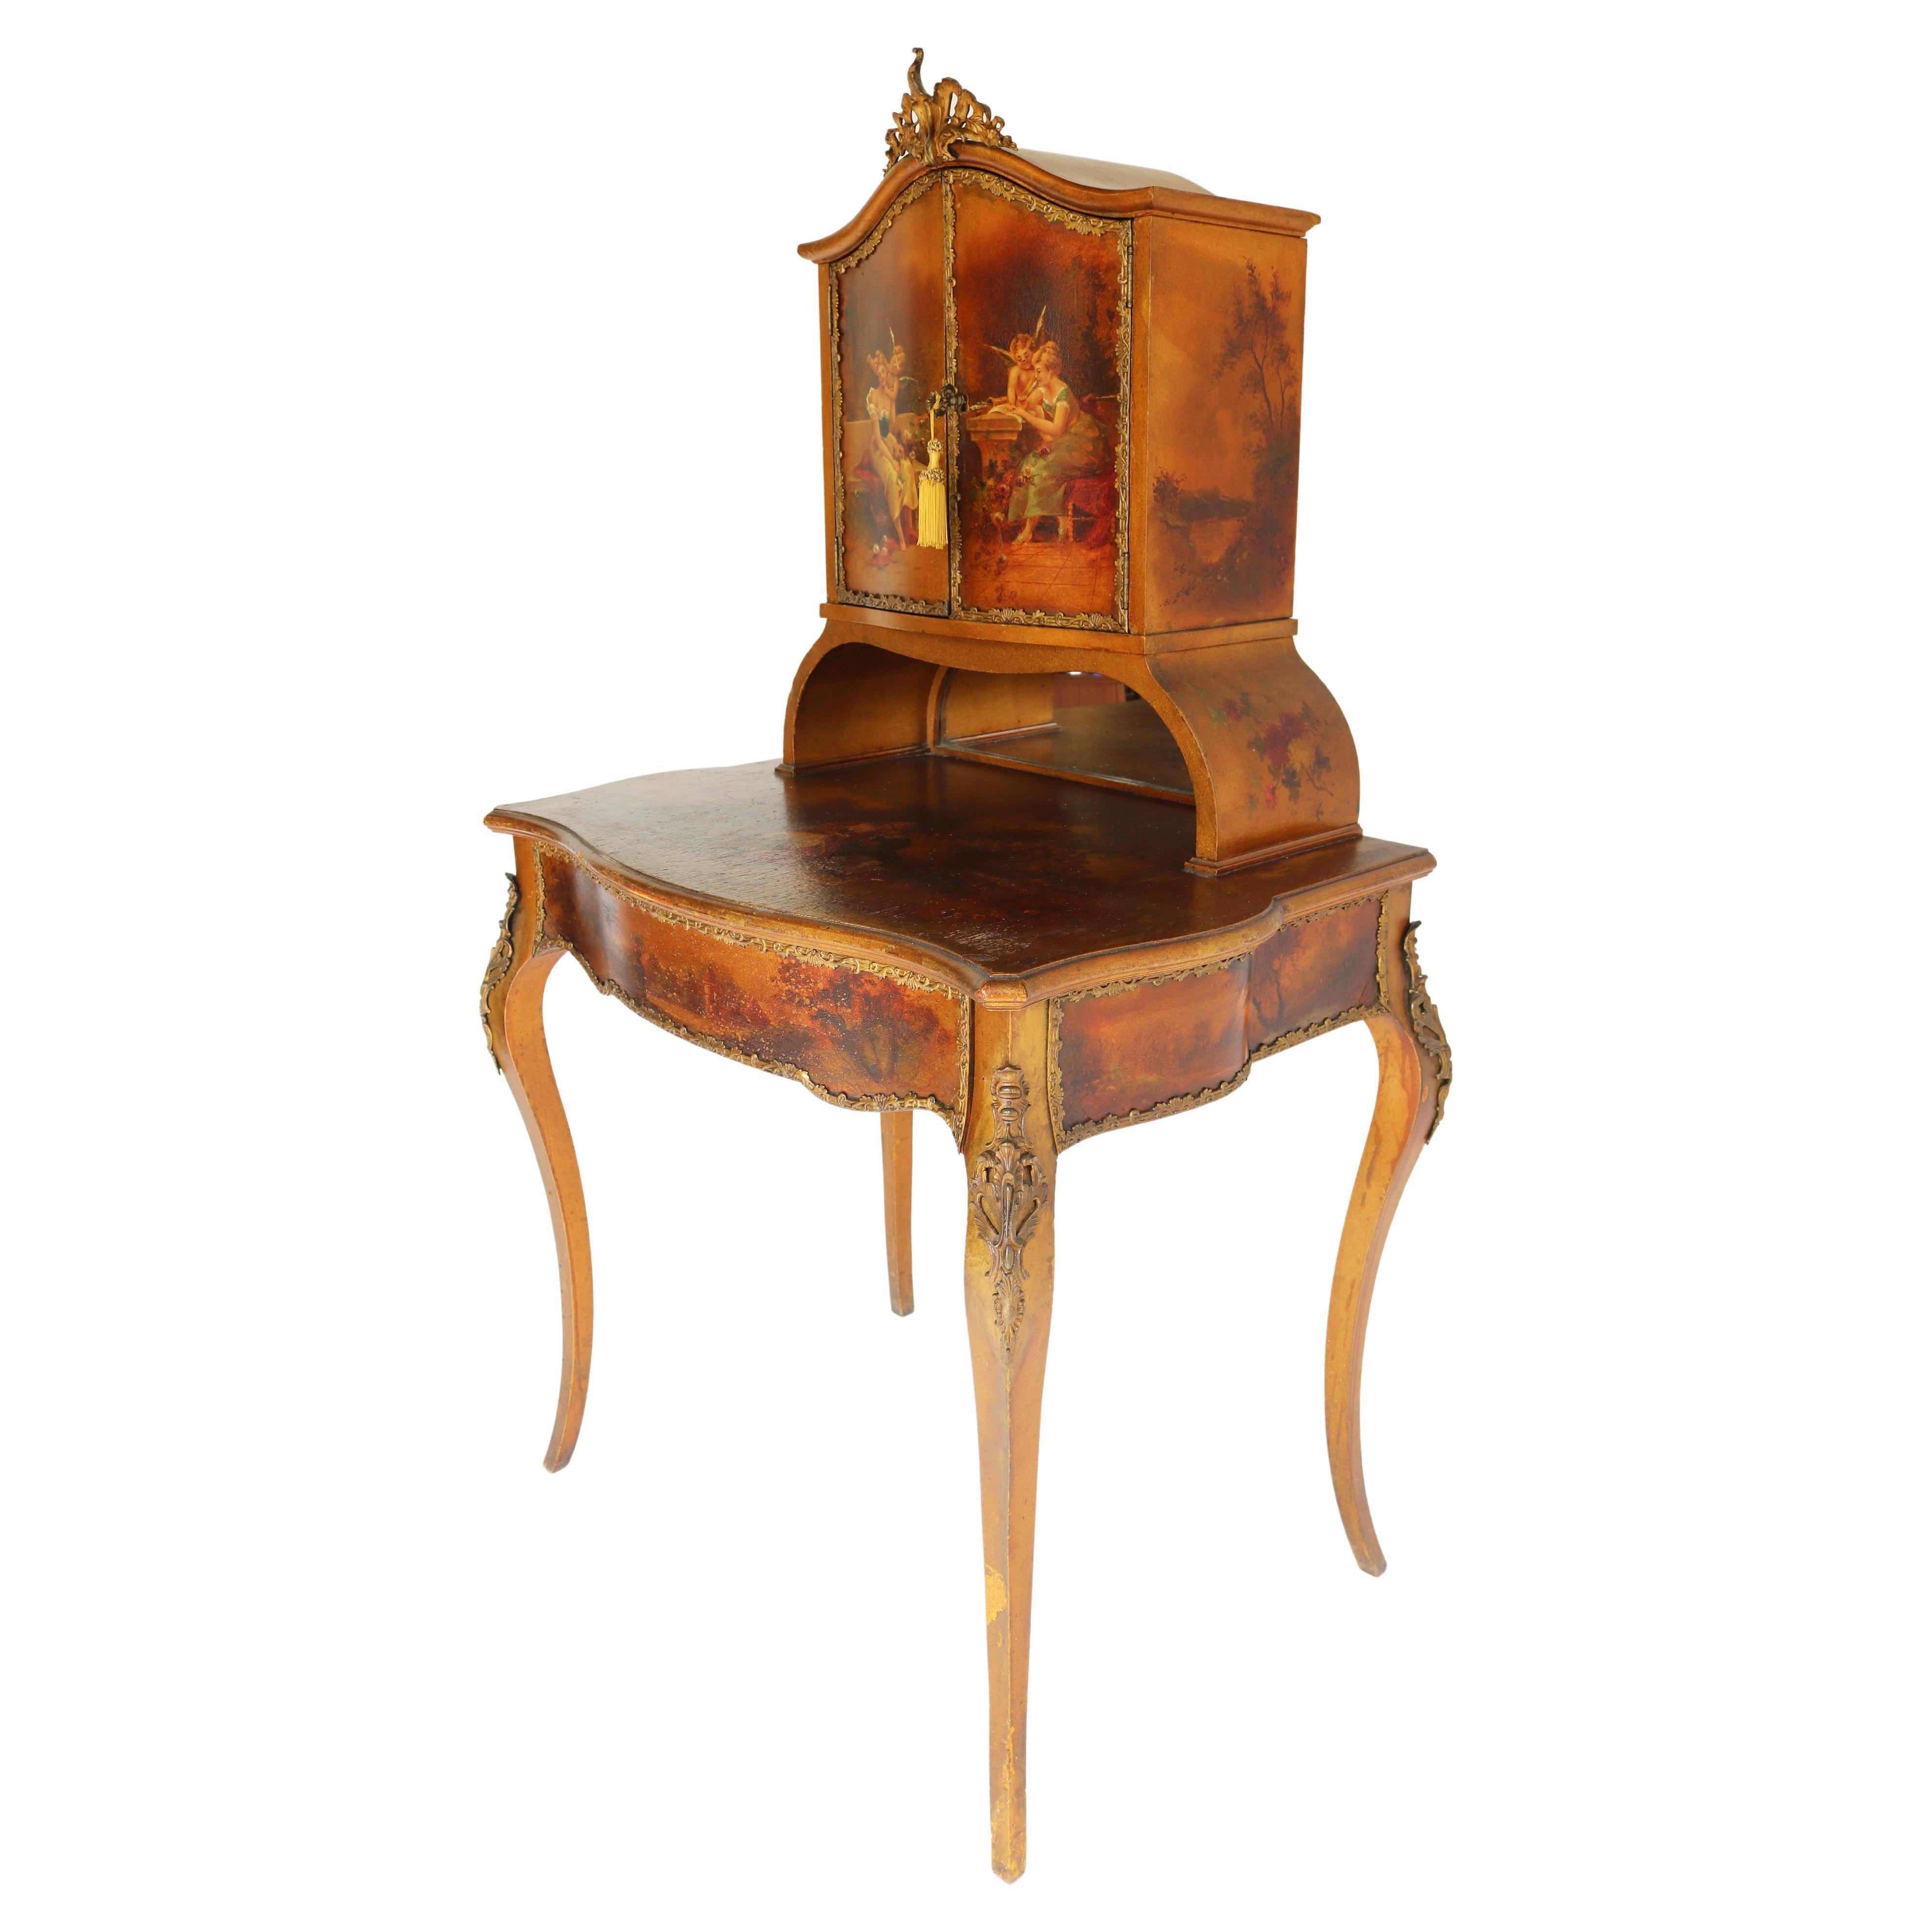 Italian Renaissance Dressing Table 19th Century Hand Painted by Müller Morten For Sale